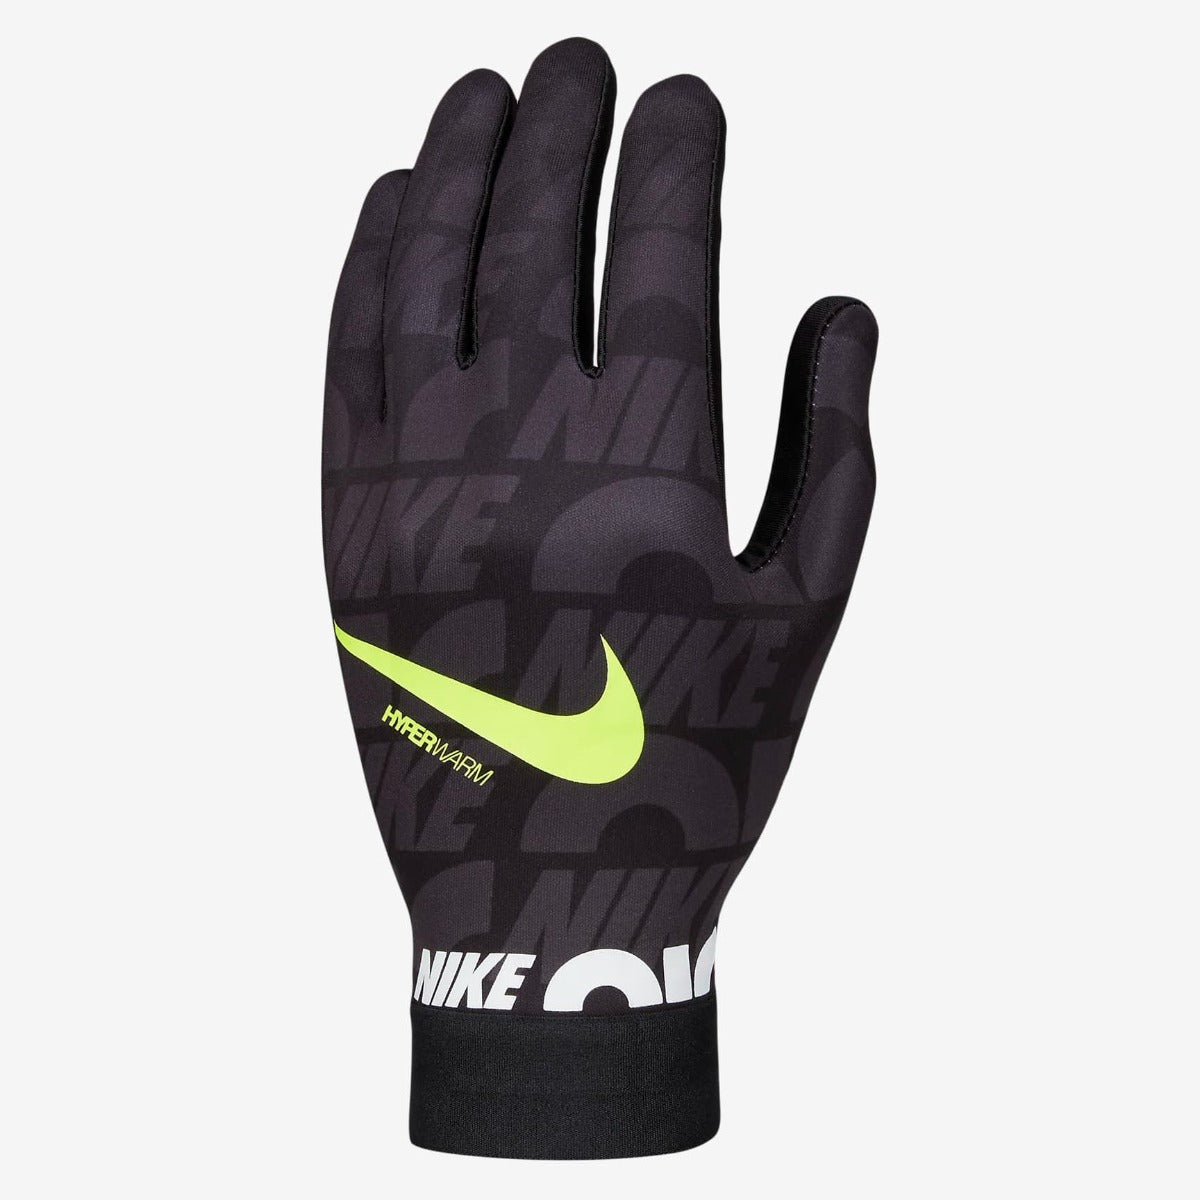 Nike Academy Hyperwarm Field Player Gloves - Black-Anthracite-Volt (Single - Outer)